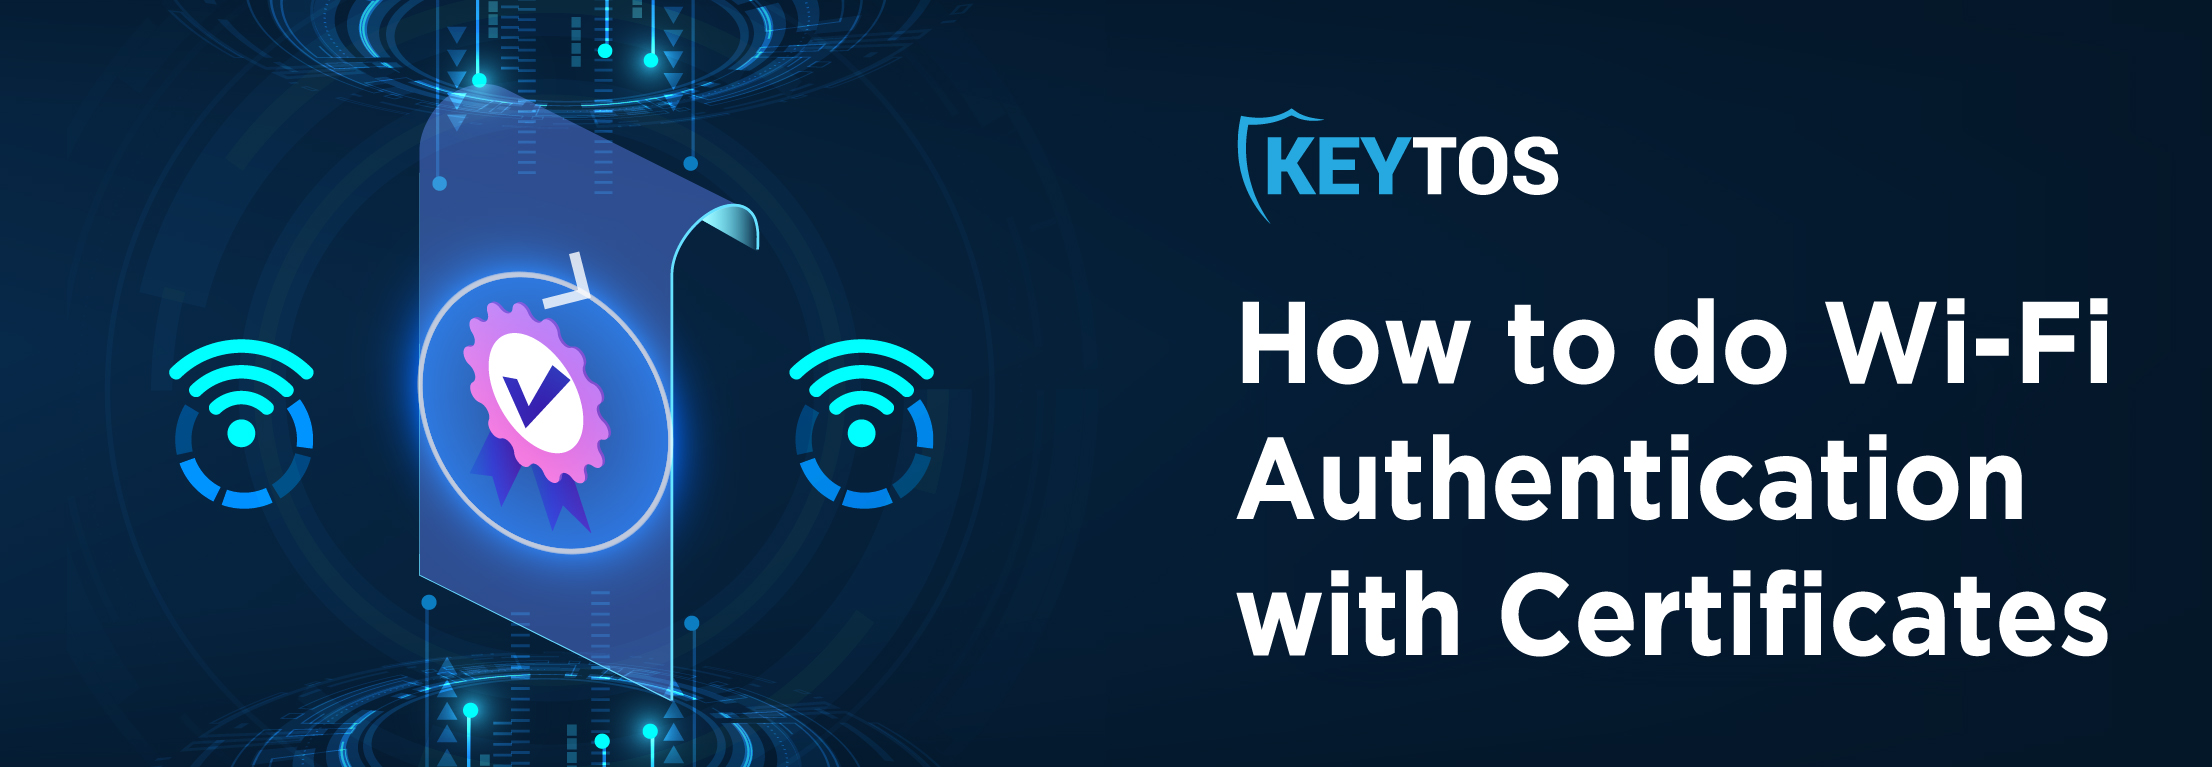 How to do Wi-Fi Certificate-Based Authentication (CBA) Using EAP-TLS and RADIUS